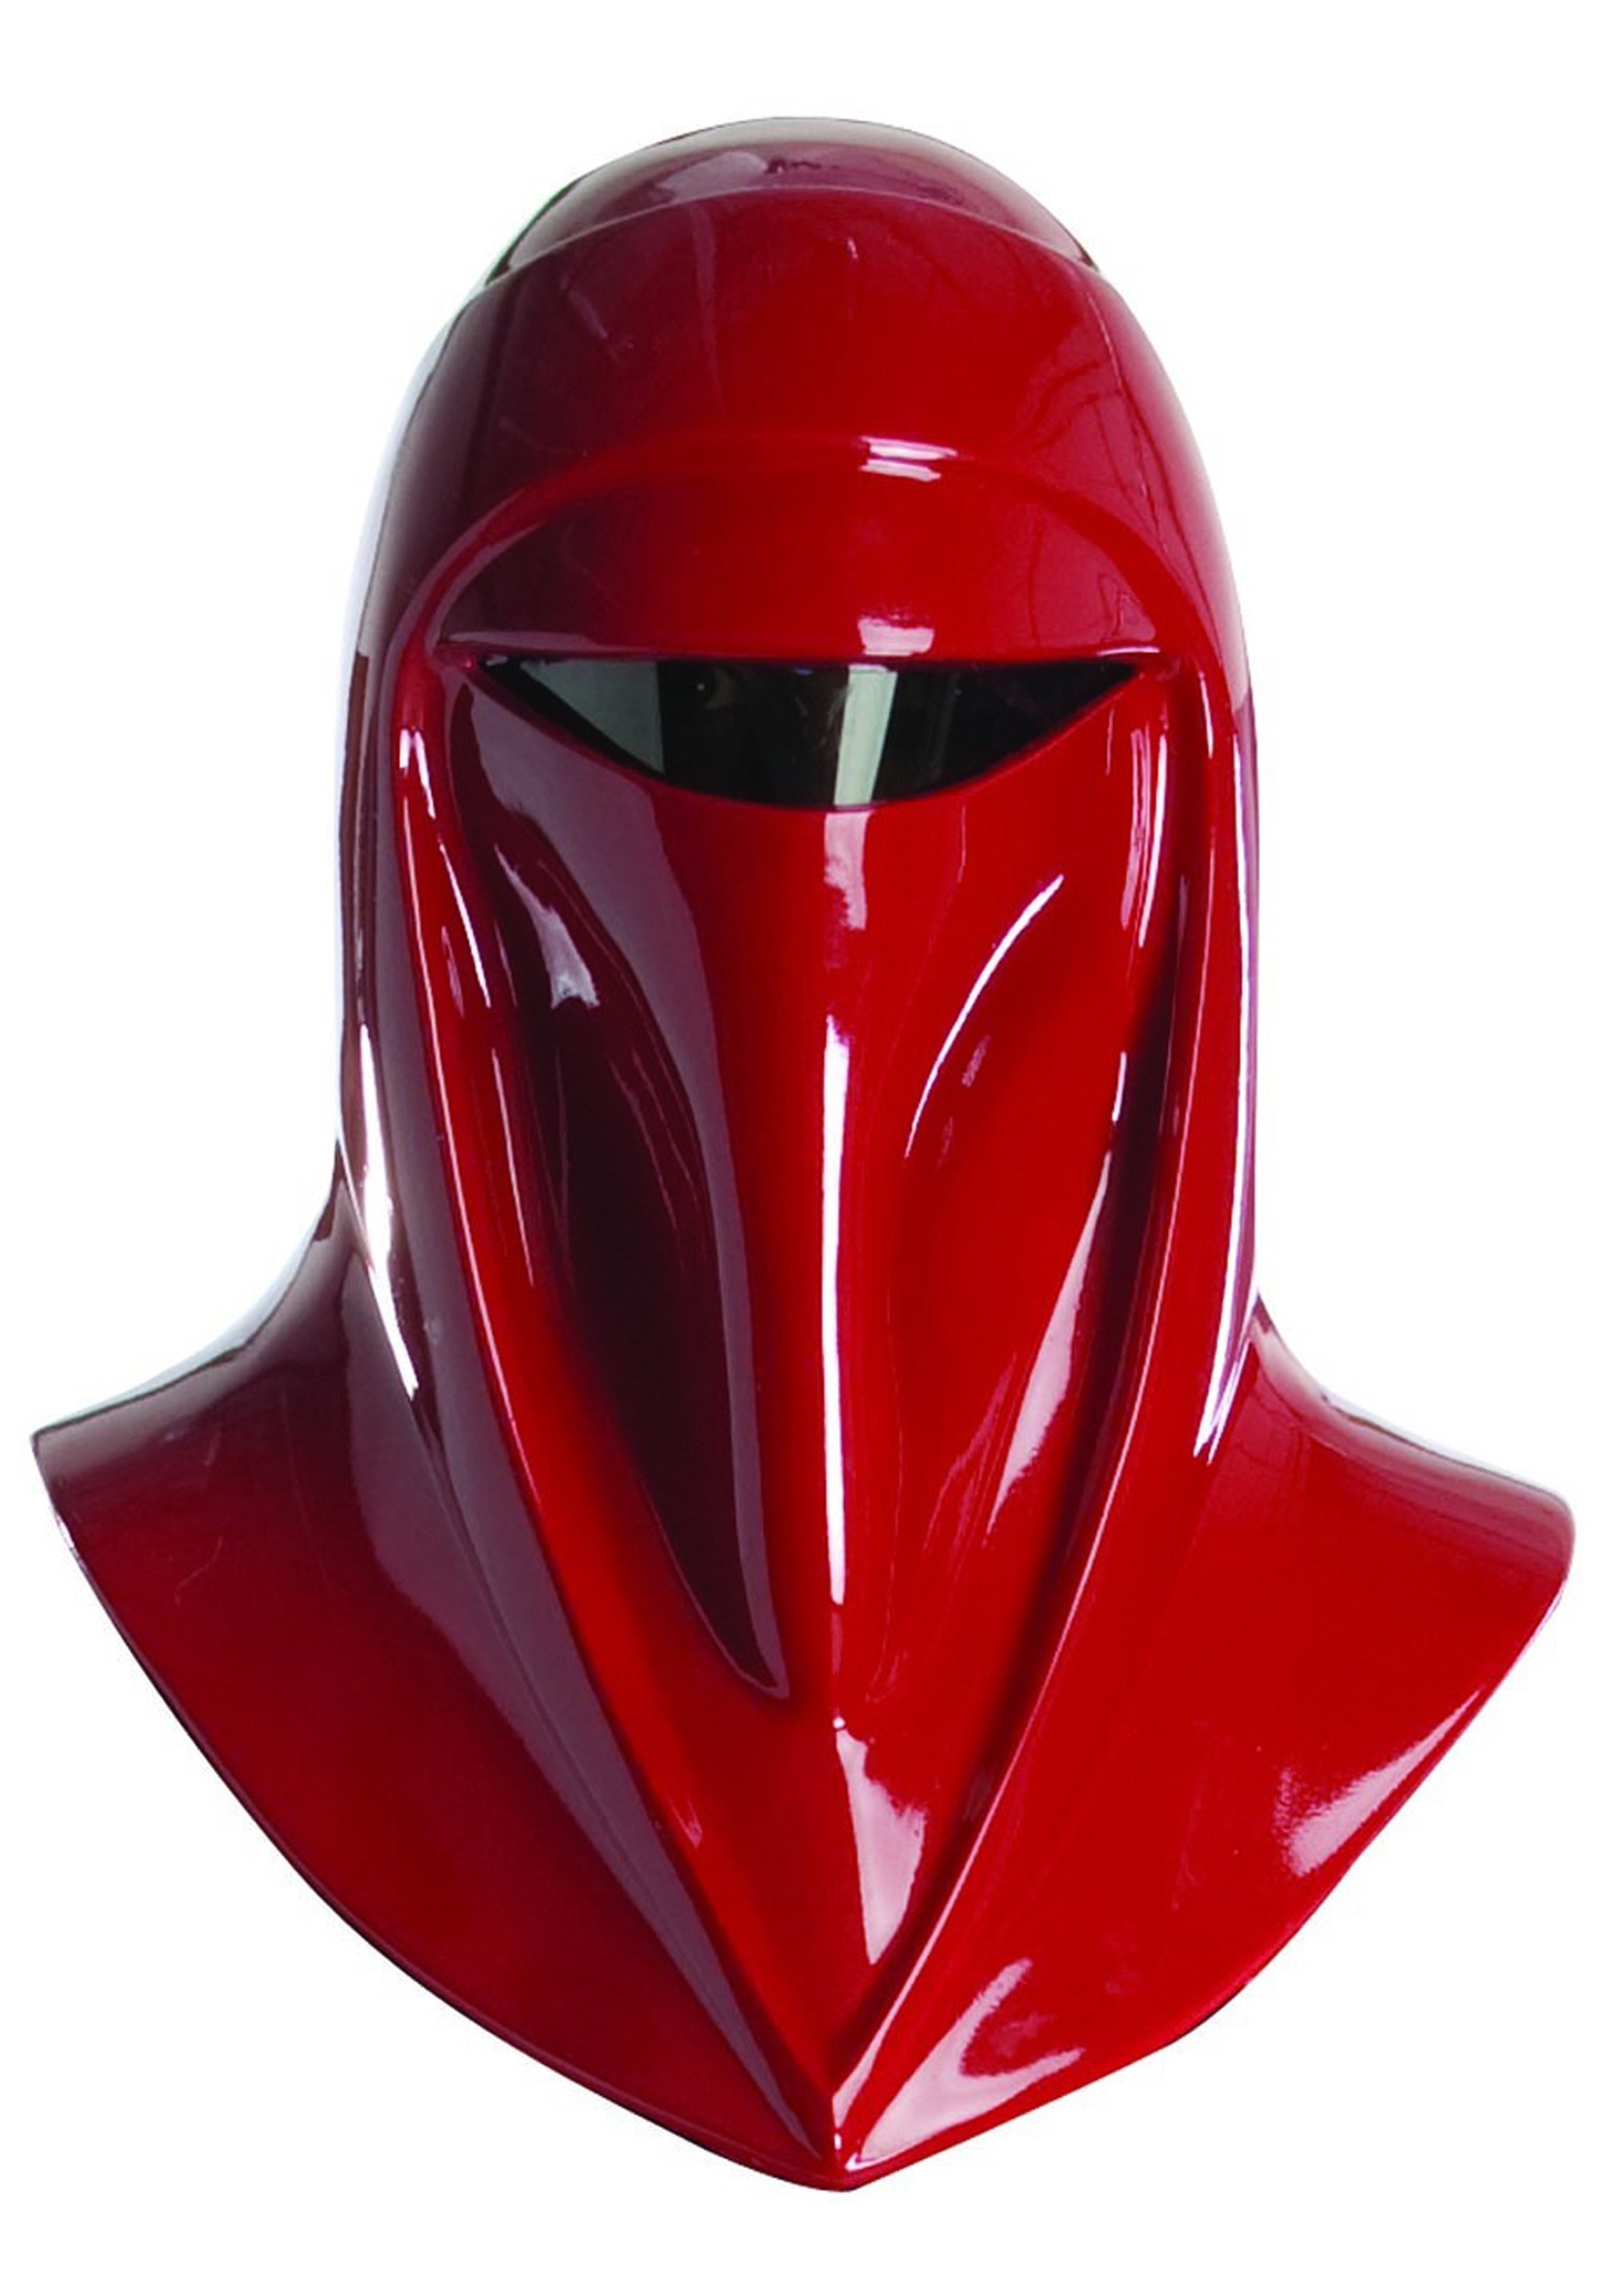 Imperial Guard Helmet Adult Star Wars Supreme Edition Collector's Costume Mask 